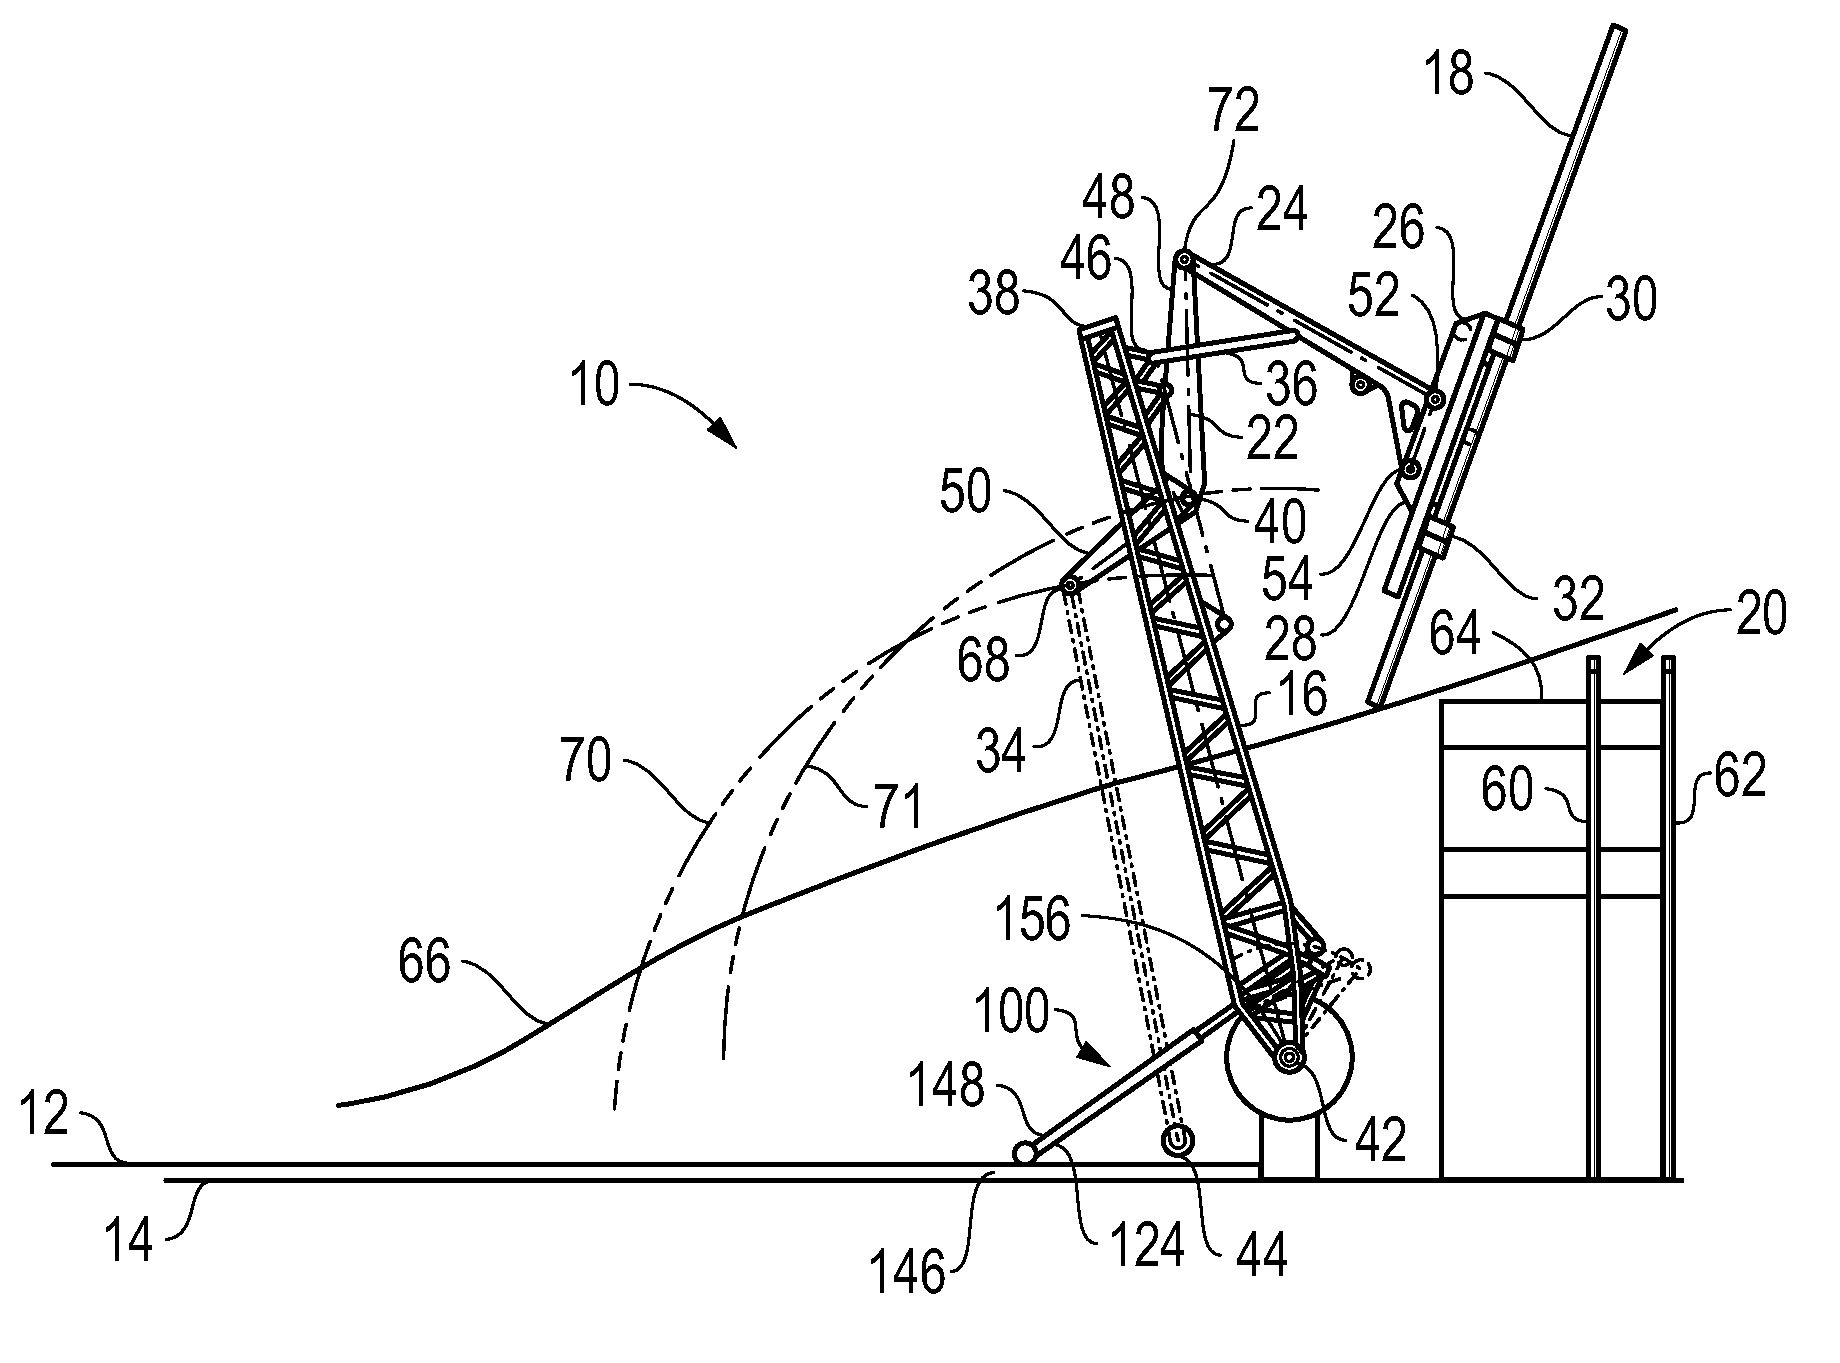 Raise-Assist and Smart Energy System for a Pipe Handling Apparatus